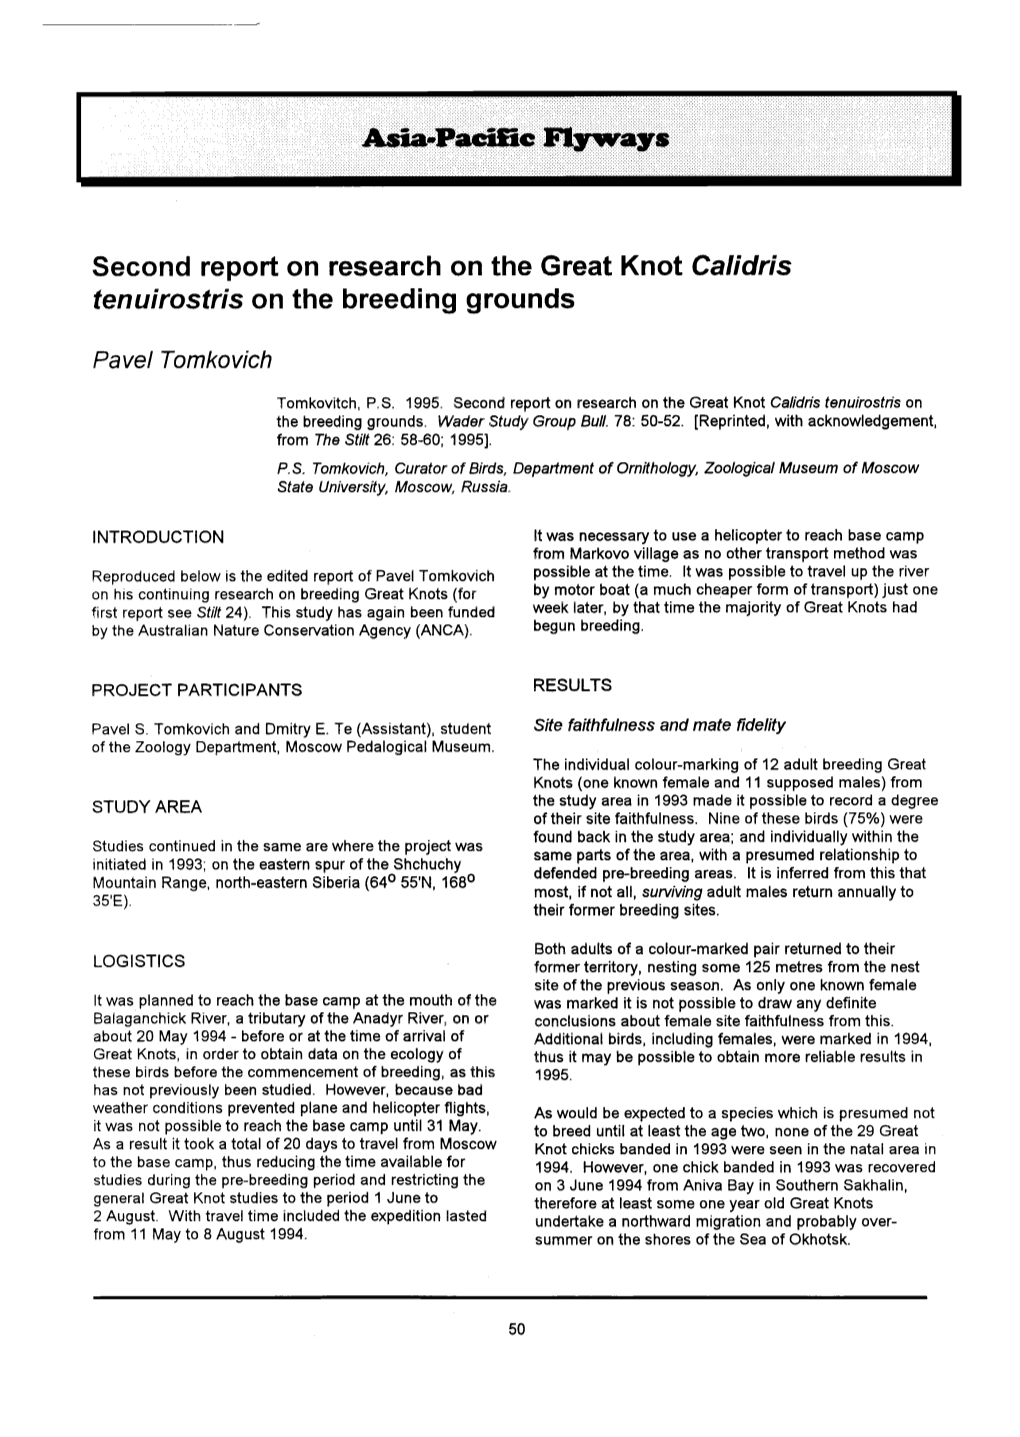 Second Report on Research on the Great Knot &lt;I&gt;Calidris Tenuirostris